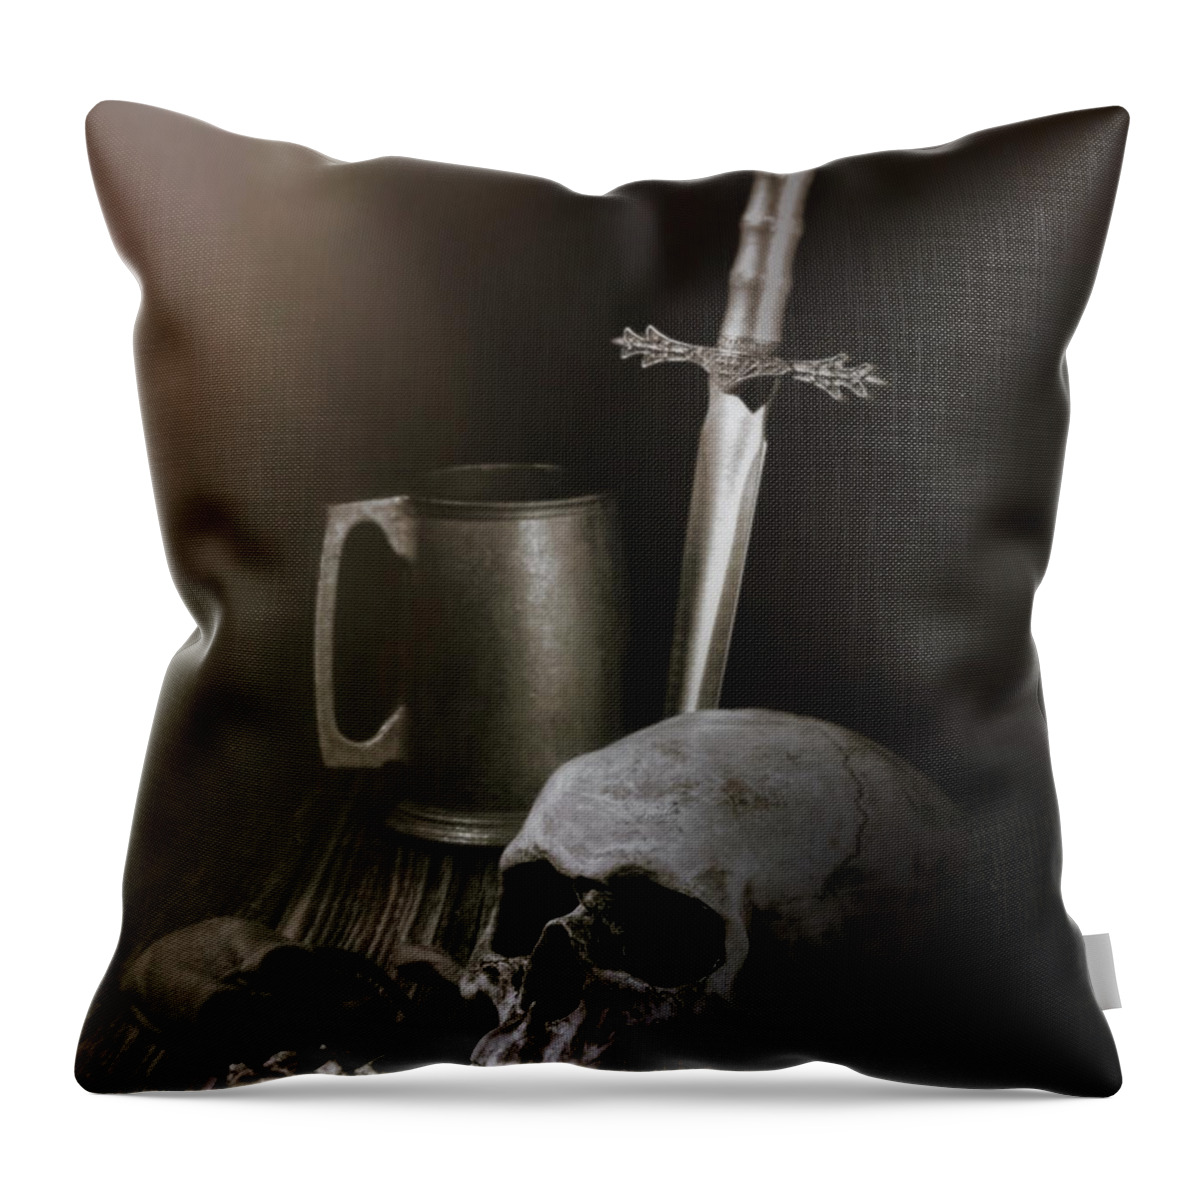 Medieval Throw Pillow featuring the photograph Medieval Still Life by Tom Mc Nemar